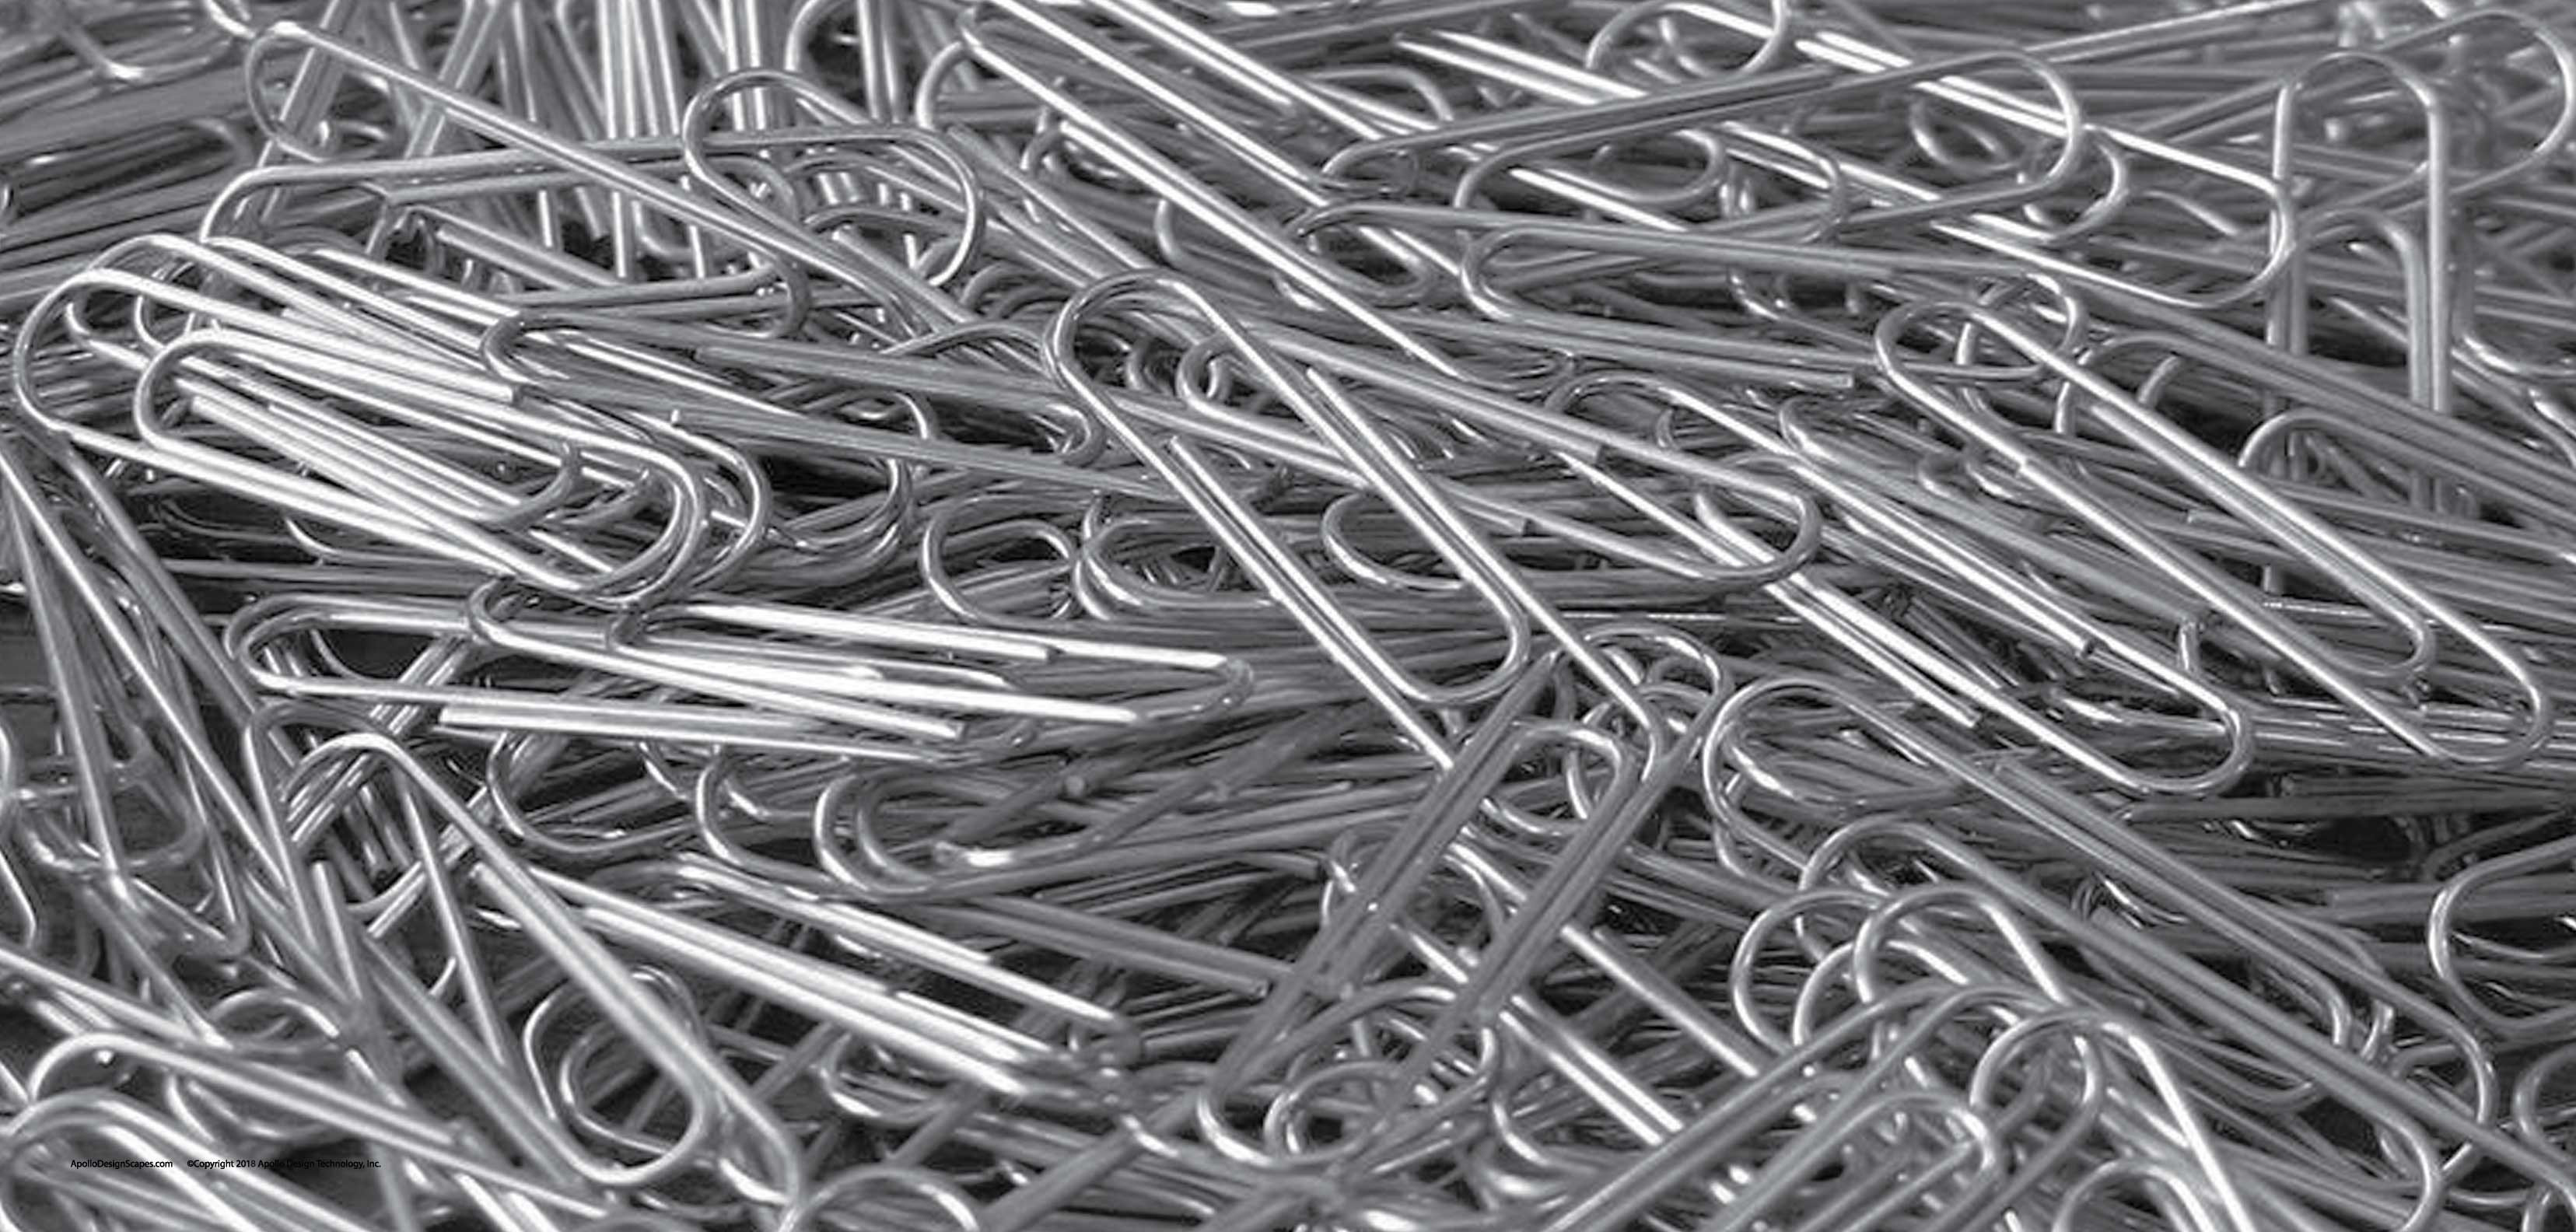 Paperclips - Decorative Fluorescent Light Covers